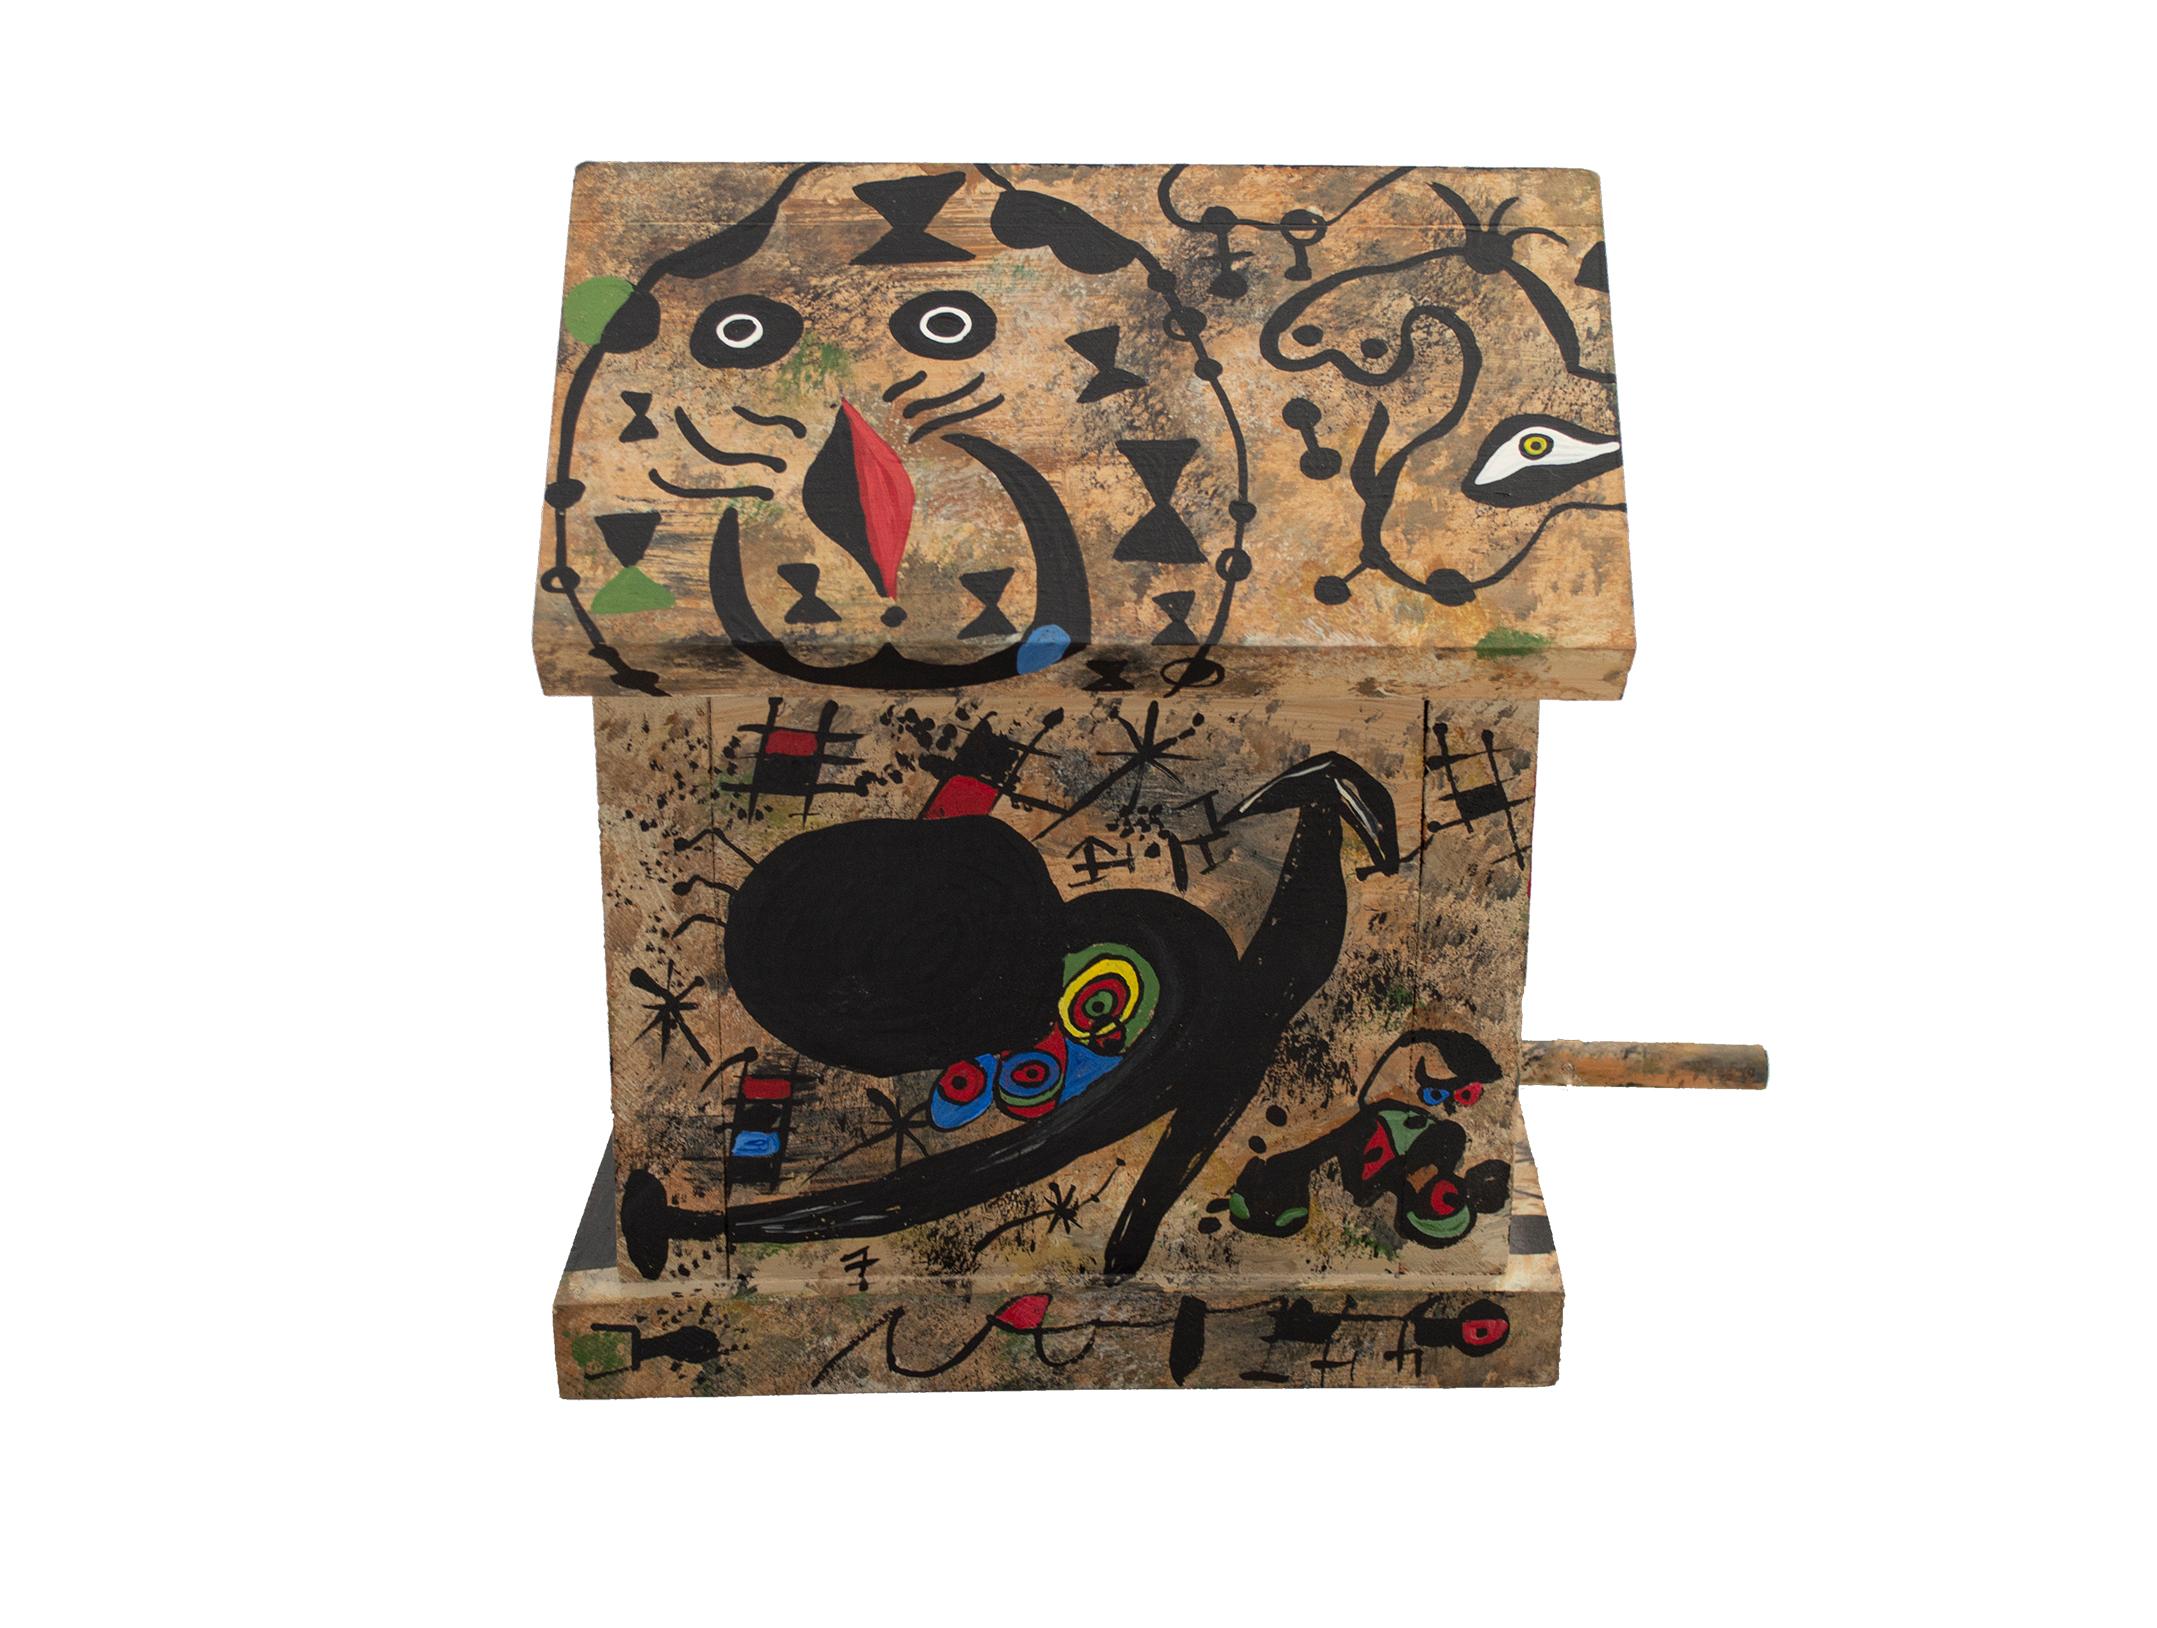 "Miro, Miro, On the Wall... Who's the Fairest of Them All?..." Painted Wood